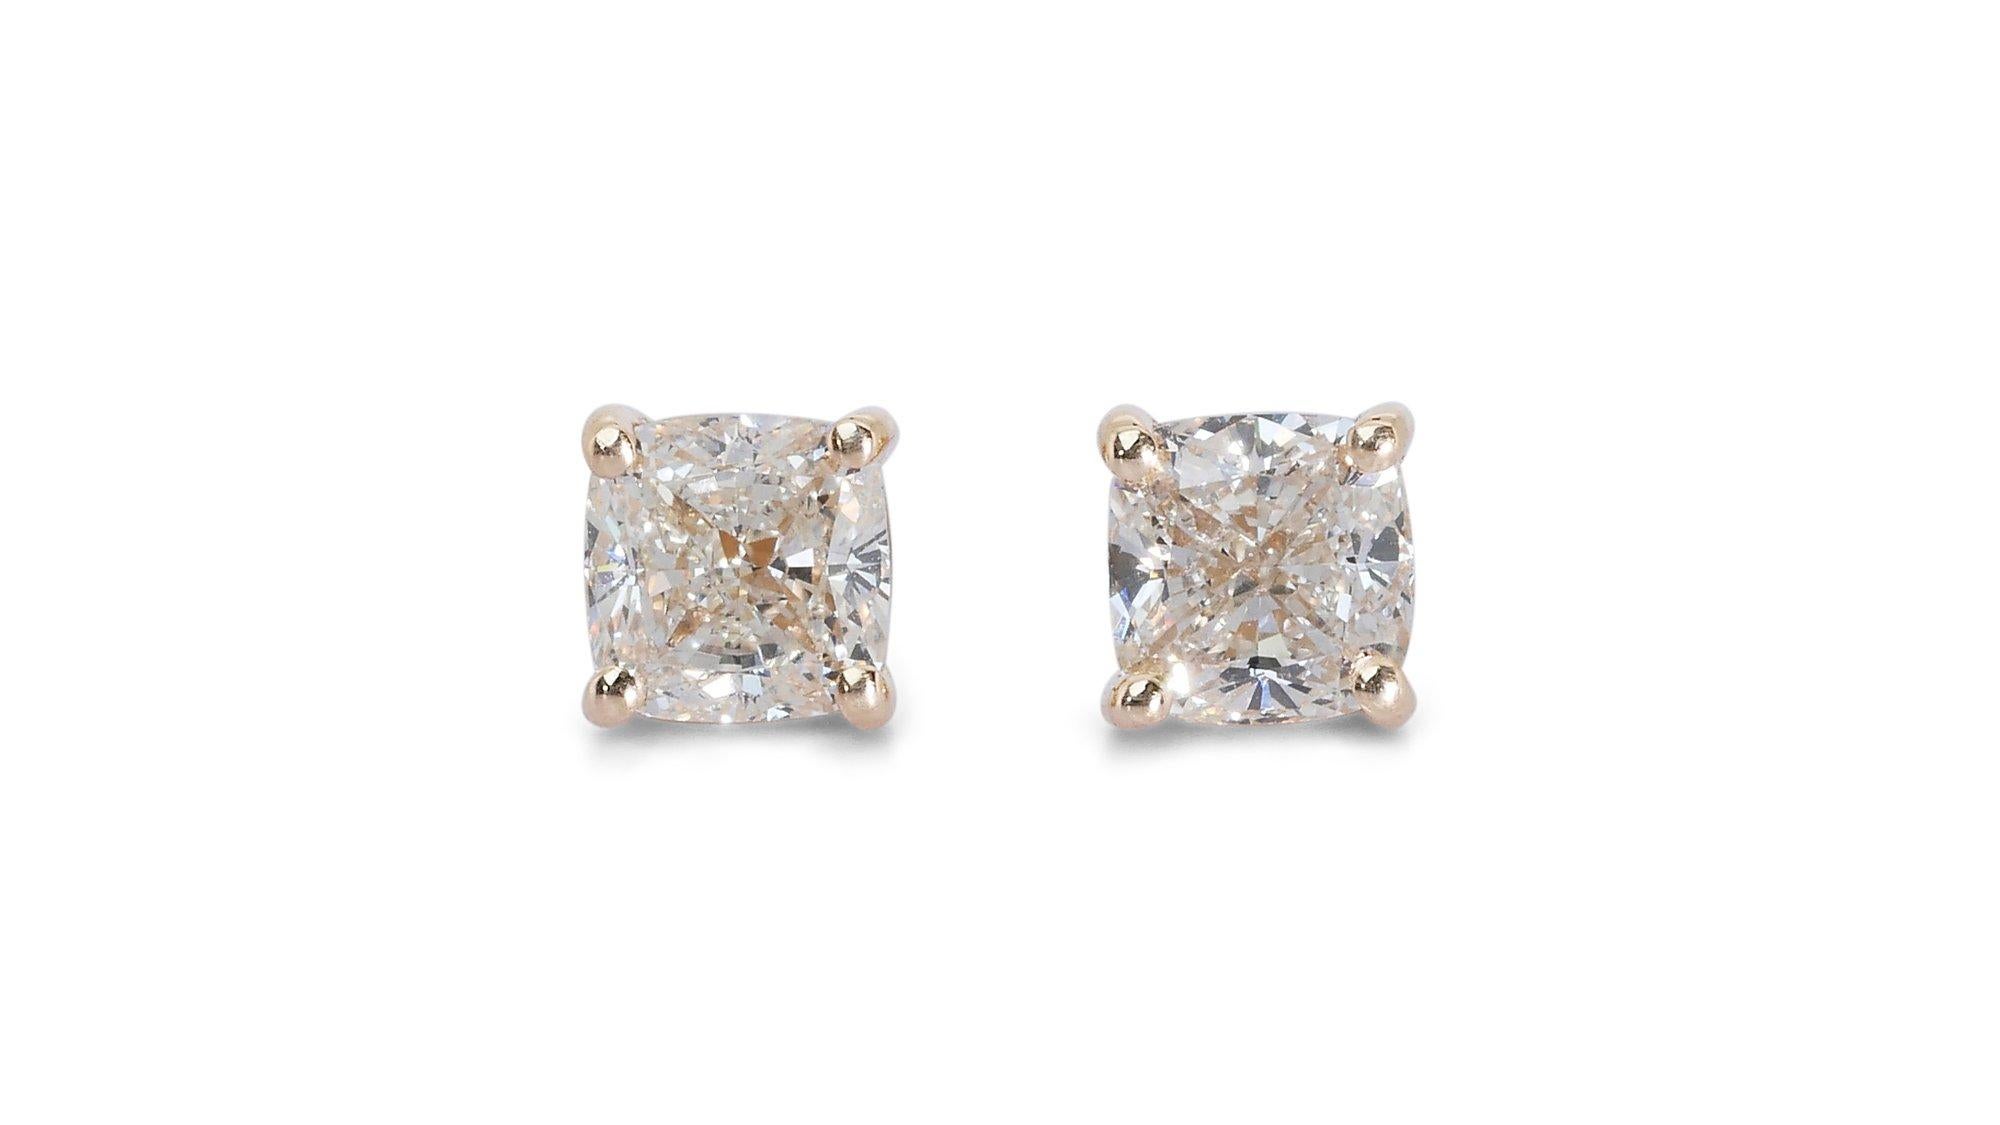 Square Cut Glamorous 18k Yellow Gold Earrings w/ 2 ct Natural Diamonds IGI Certificate For Sale